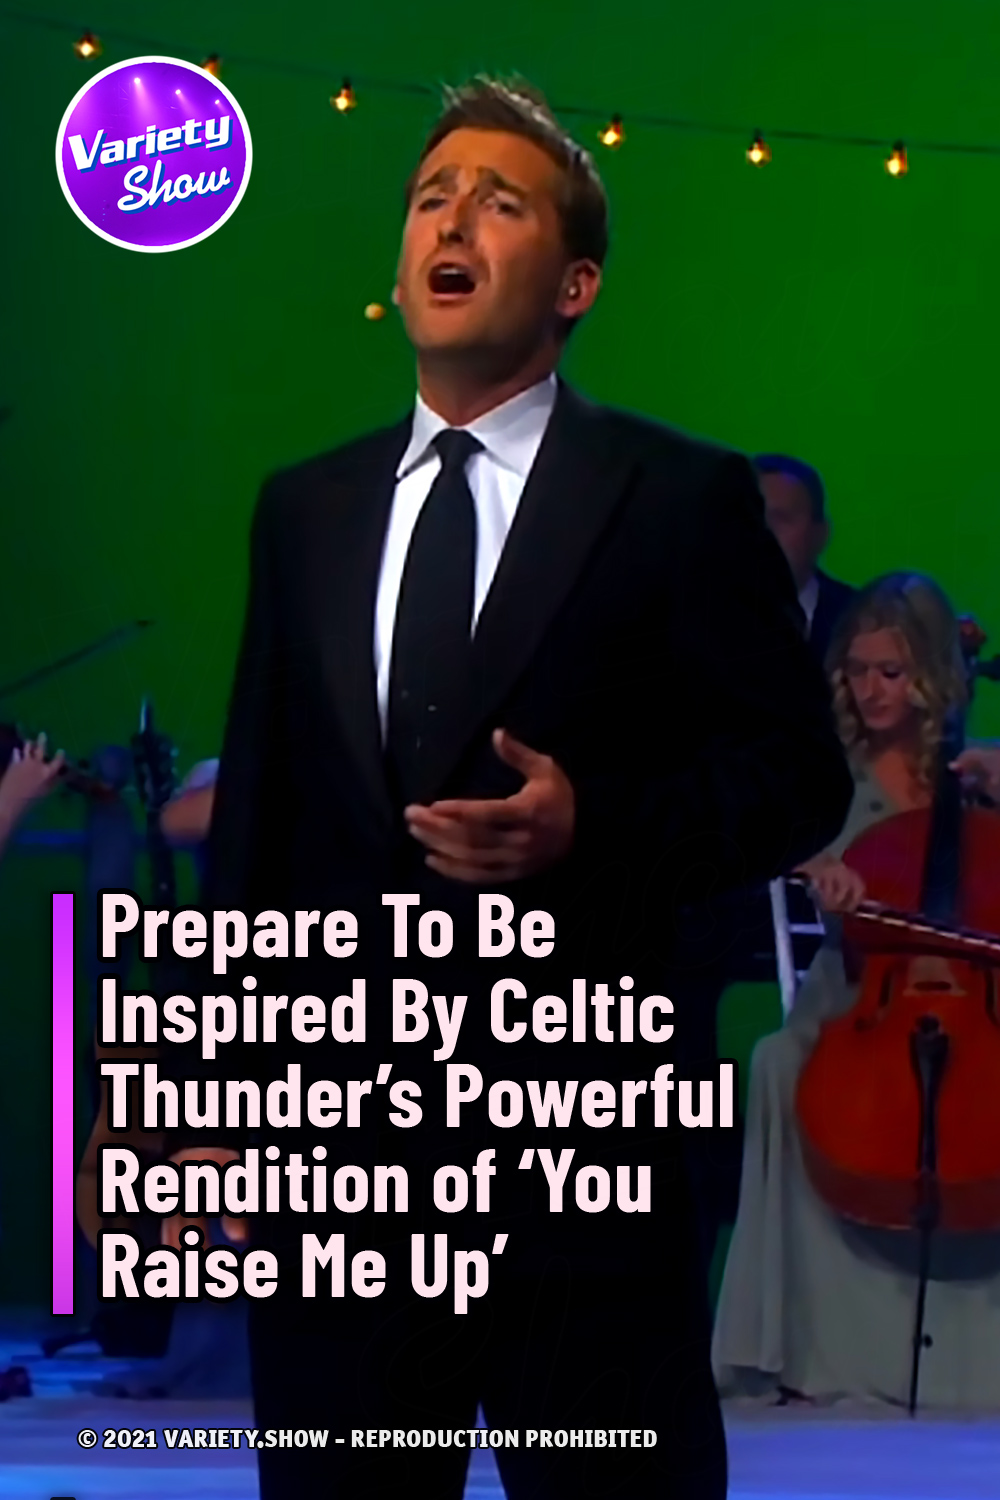 Prepare To Be Inspired By Celtic Thunder’s Powerful Rendition of ‘You Raise Me Up’